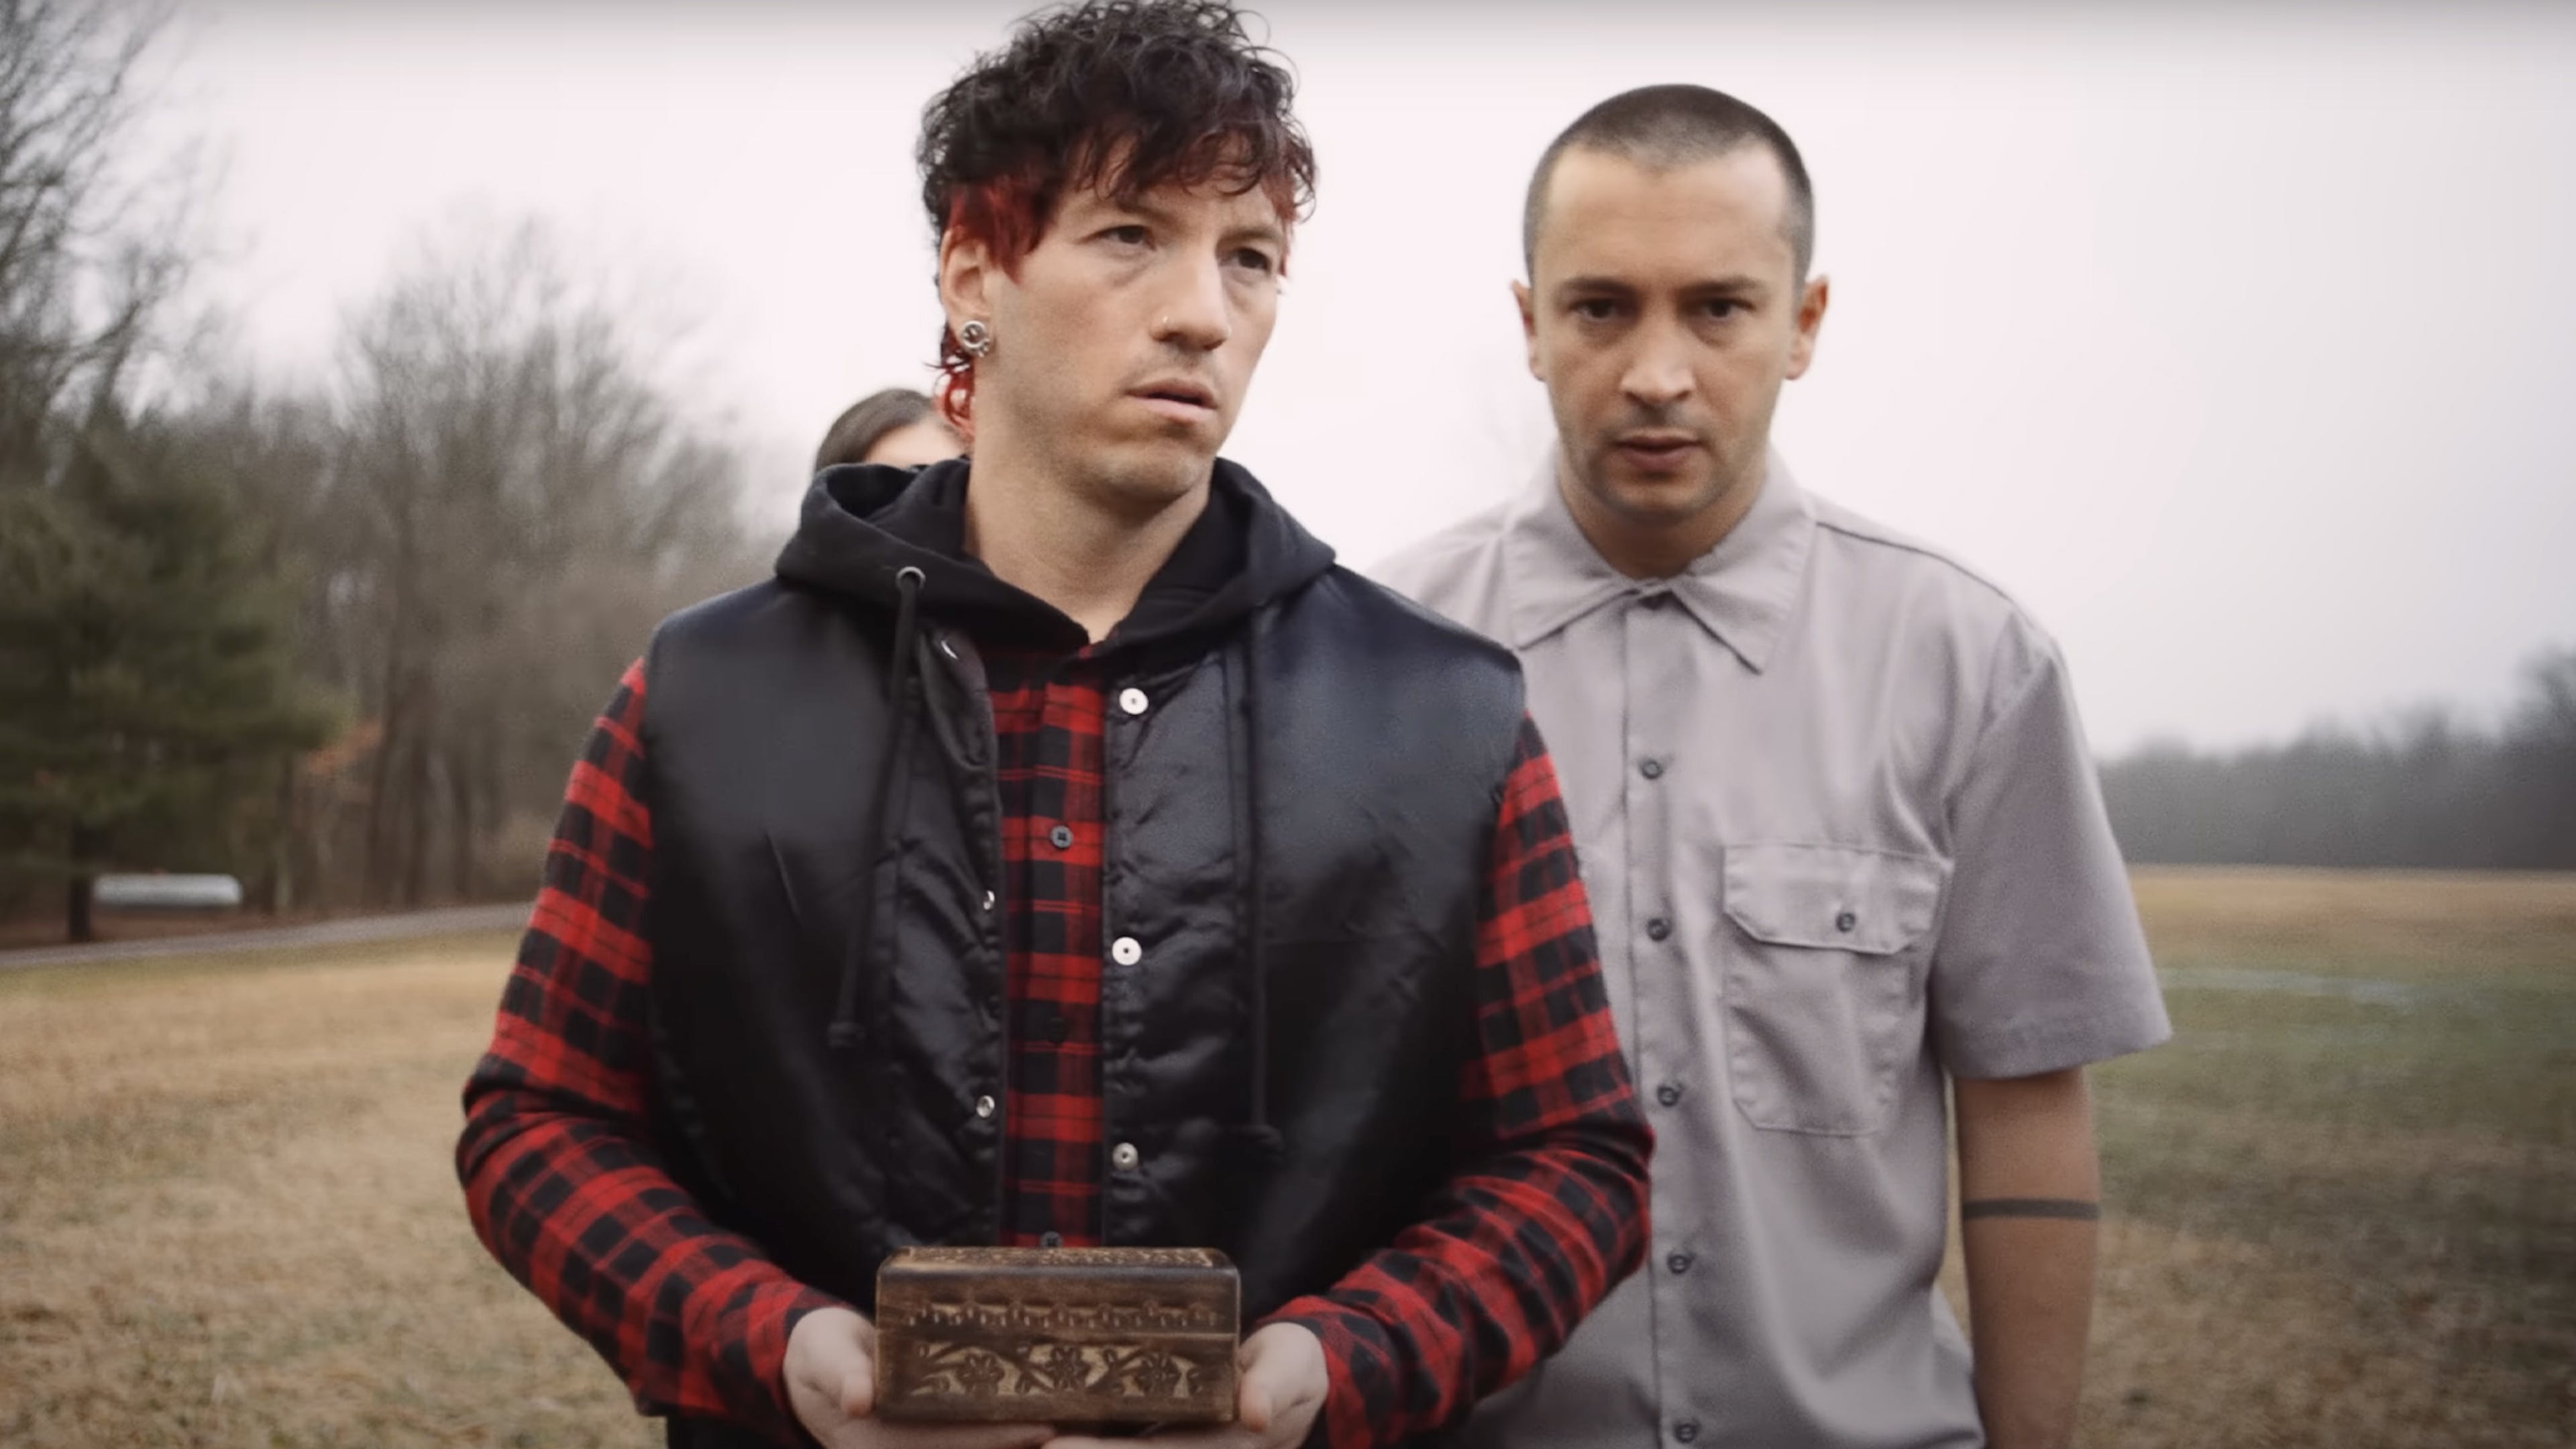 twenty one pilots have shared a song that technically isn’t on new album Clancy